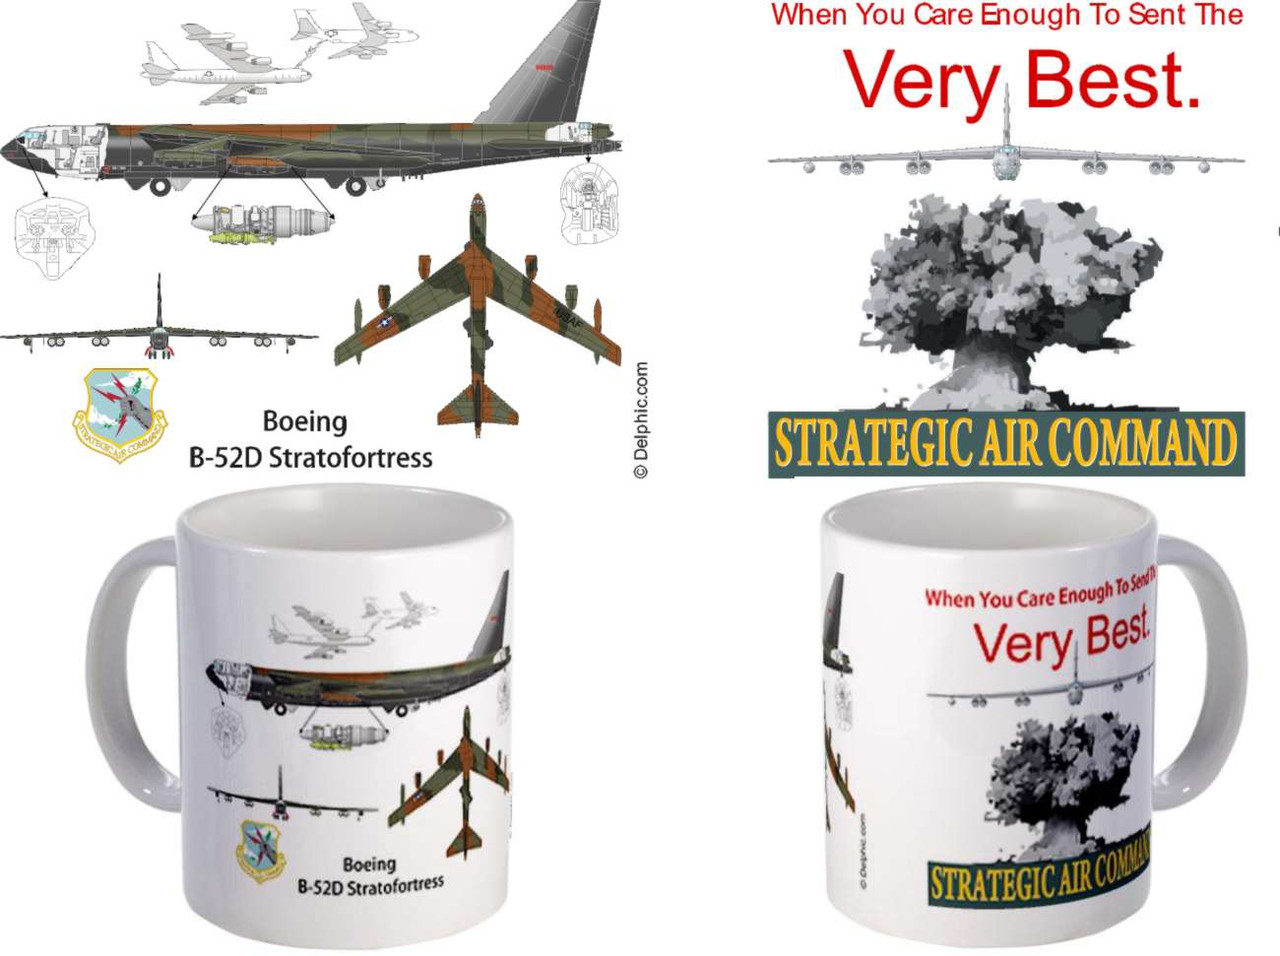 B-52 - When you care enough to send the very best mug